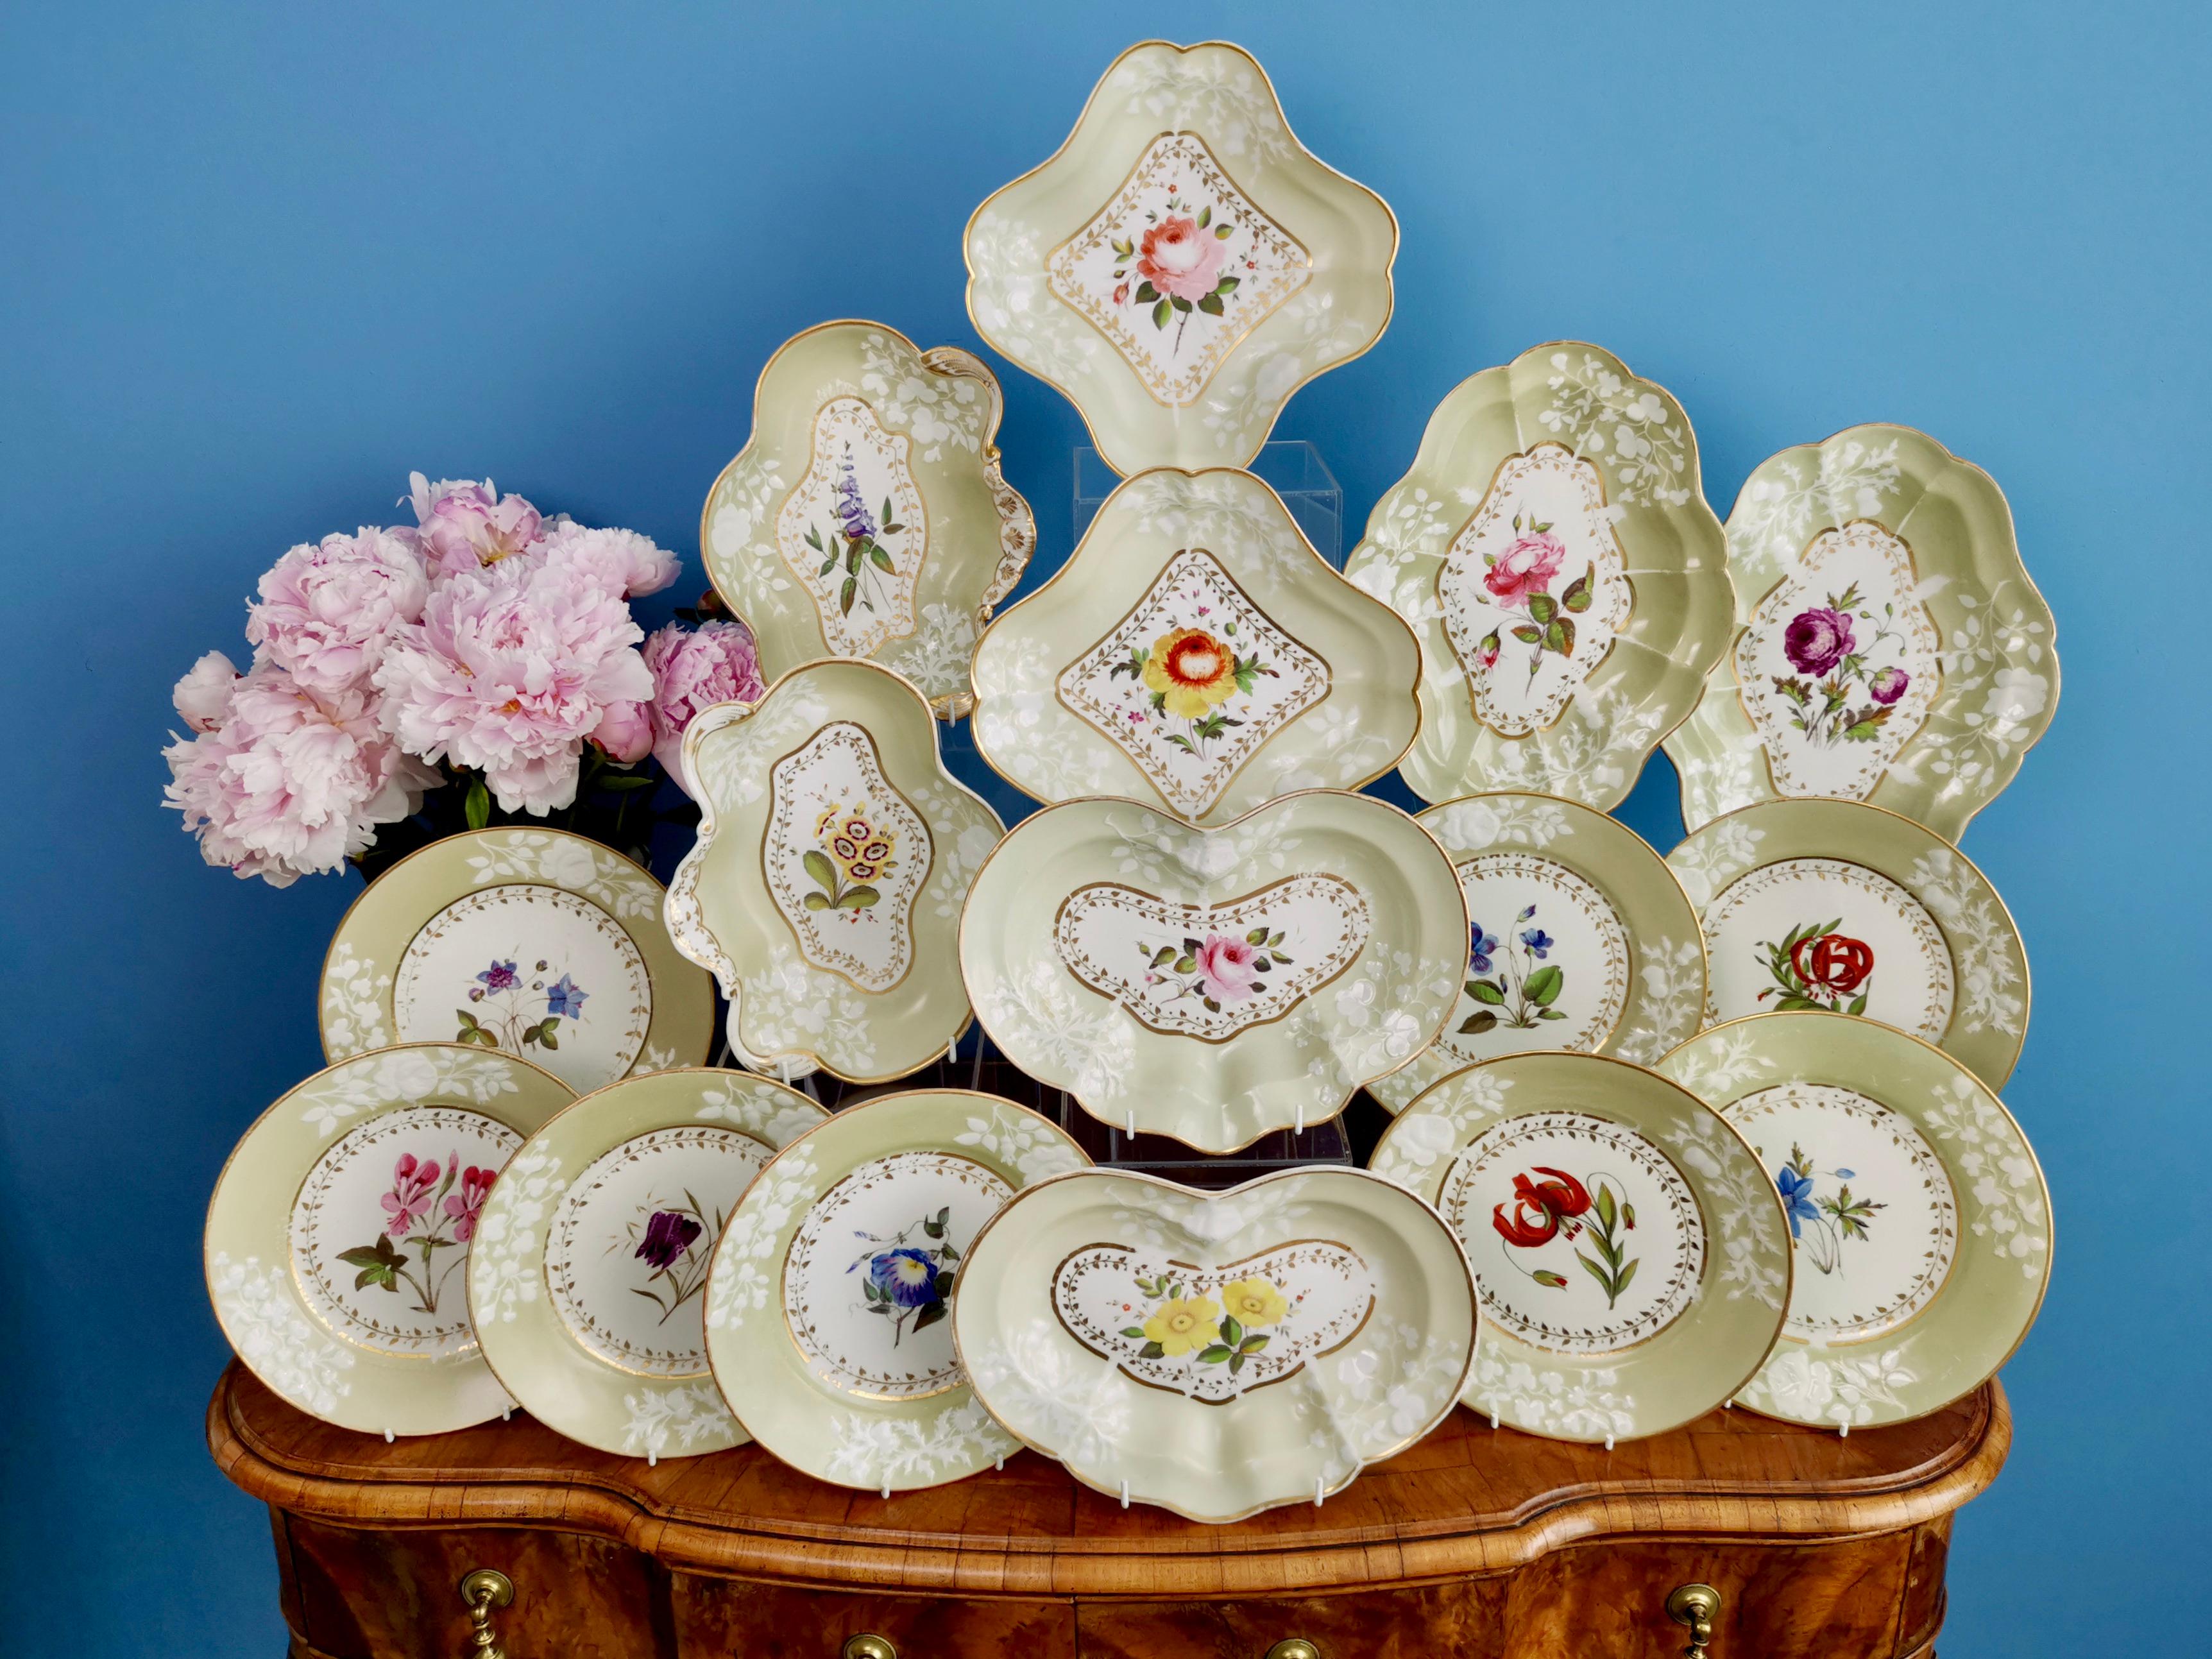 This is a stunning dessert service made by Chamberlains Worcester between 1816 and 1820. The service consists of two big lozenge shape dishes, two square dishes, two kidney shaped dishes, two leaf shaped dishes, and eight plates. The service has the